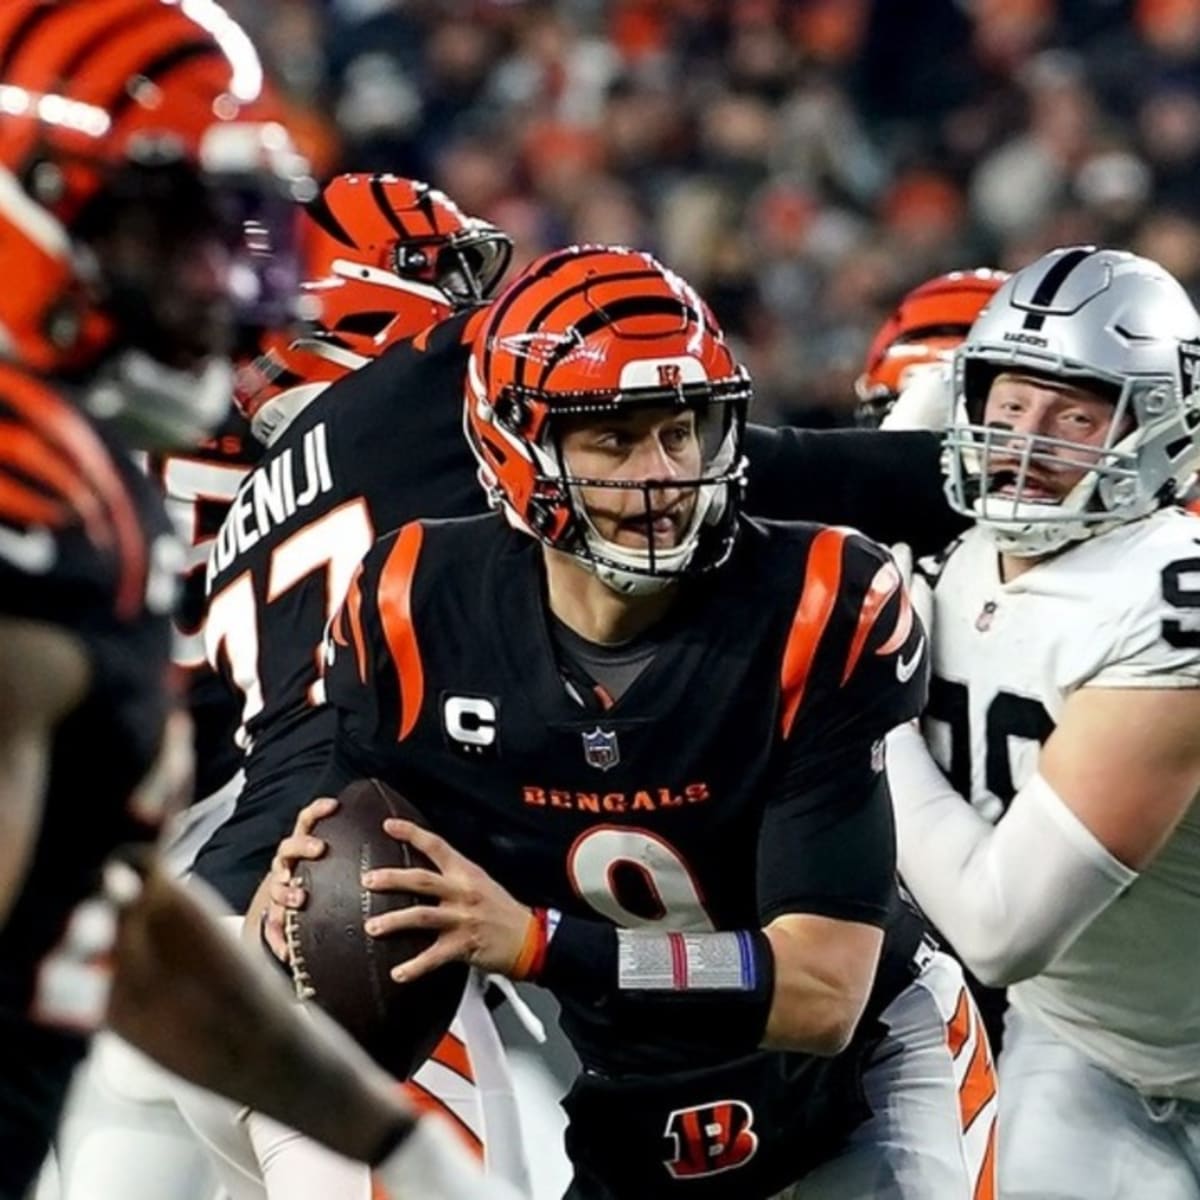 Raiders lose to Bengals in wild-card playoffs, season ends